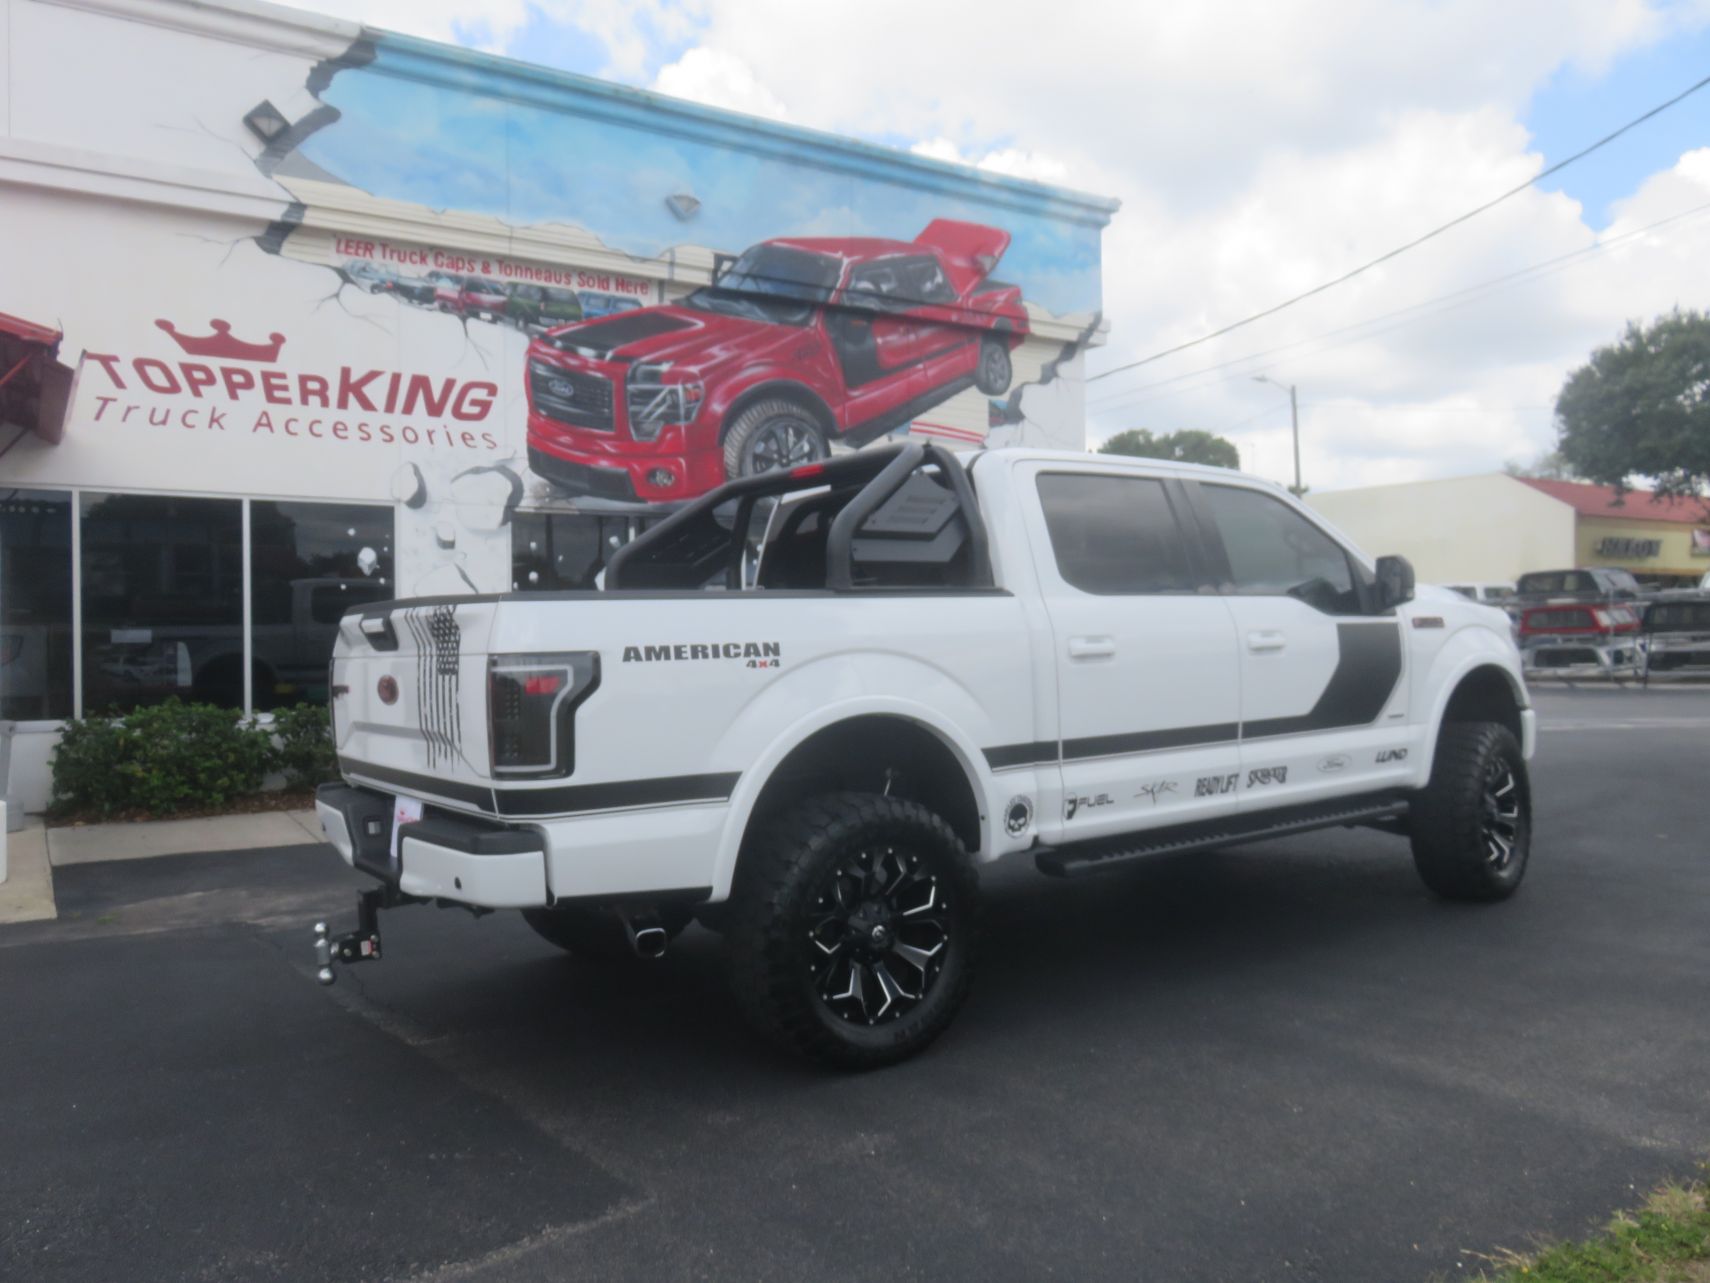 2017 Ford F150 with Dee Zee Sportsbar, Graphics, Nerf Bars, Hitch, Tint by TopperKING in Brandon 813-689-2449 or Clearwater, FL 727-530-9066. Call today!